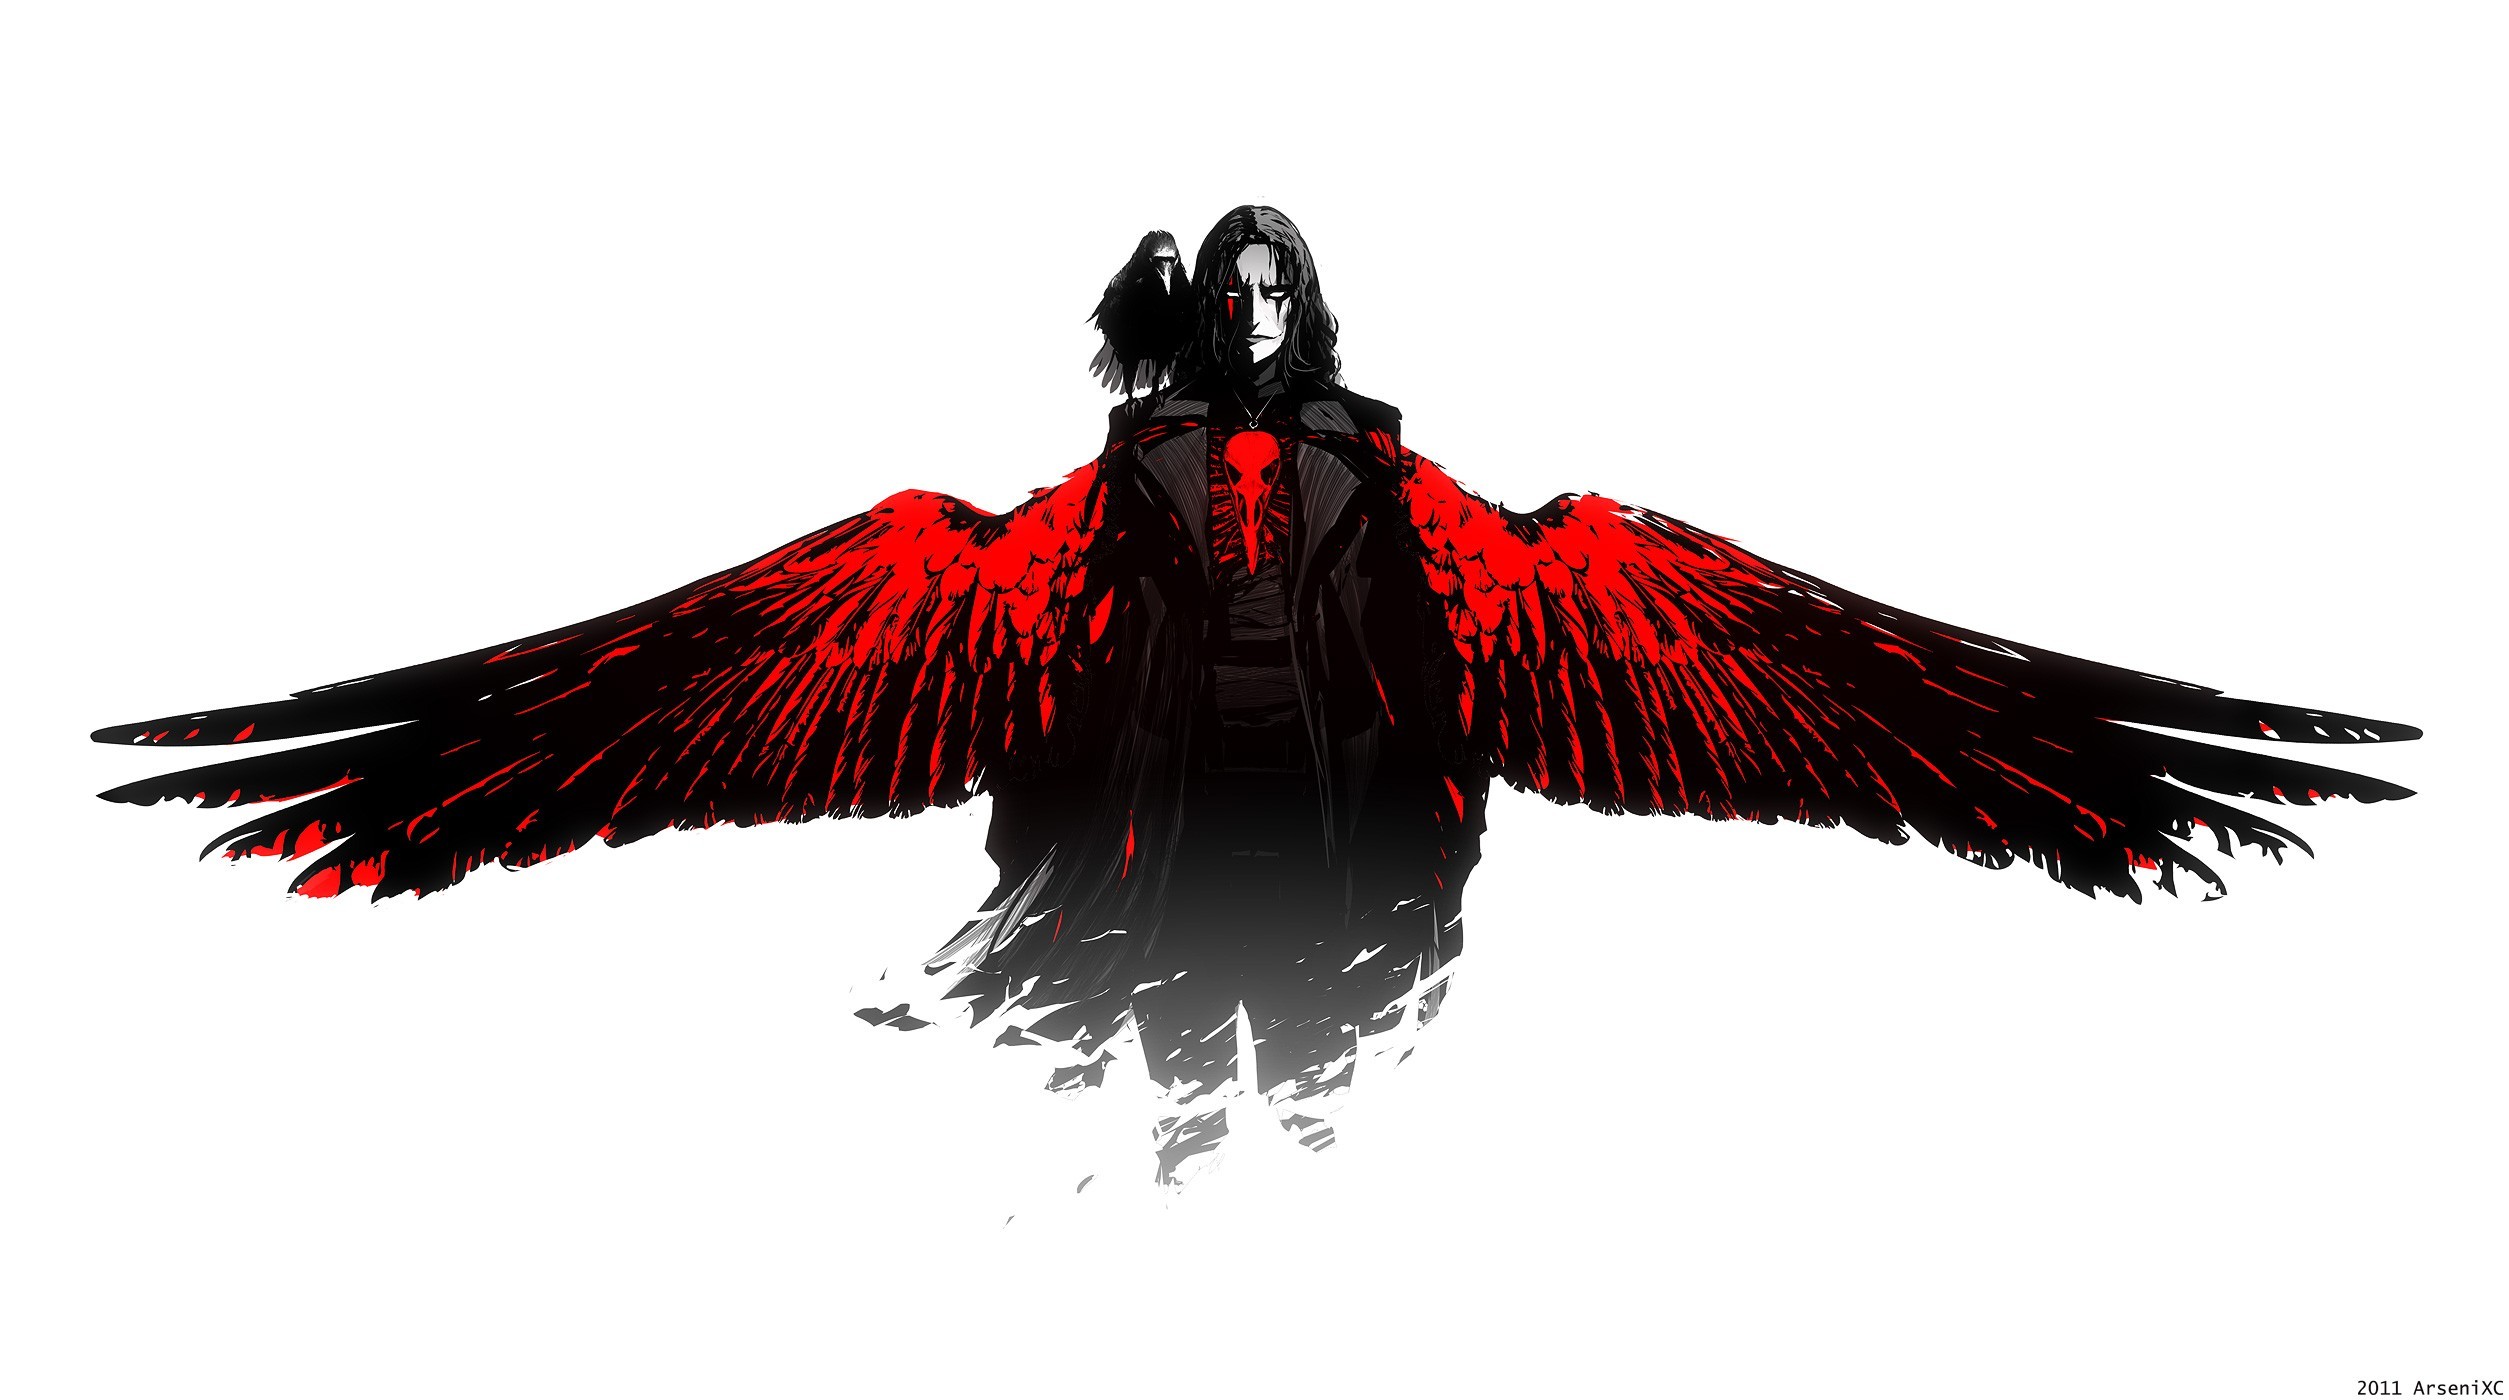 2509x1400 The Crow wallpapers The Crow wallpapers hd The Crow wallpaper The Crow hd  wallpaper The Crow desktop